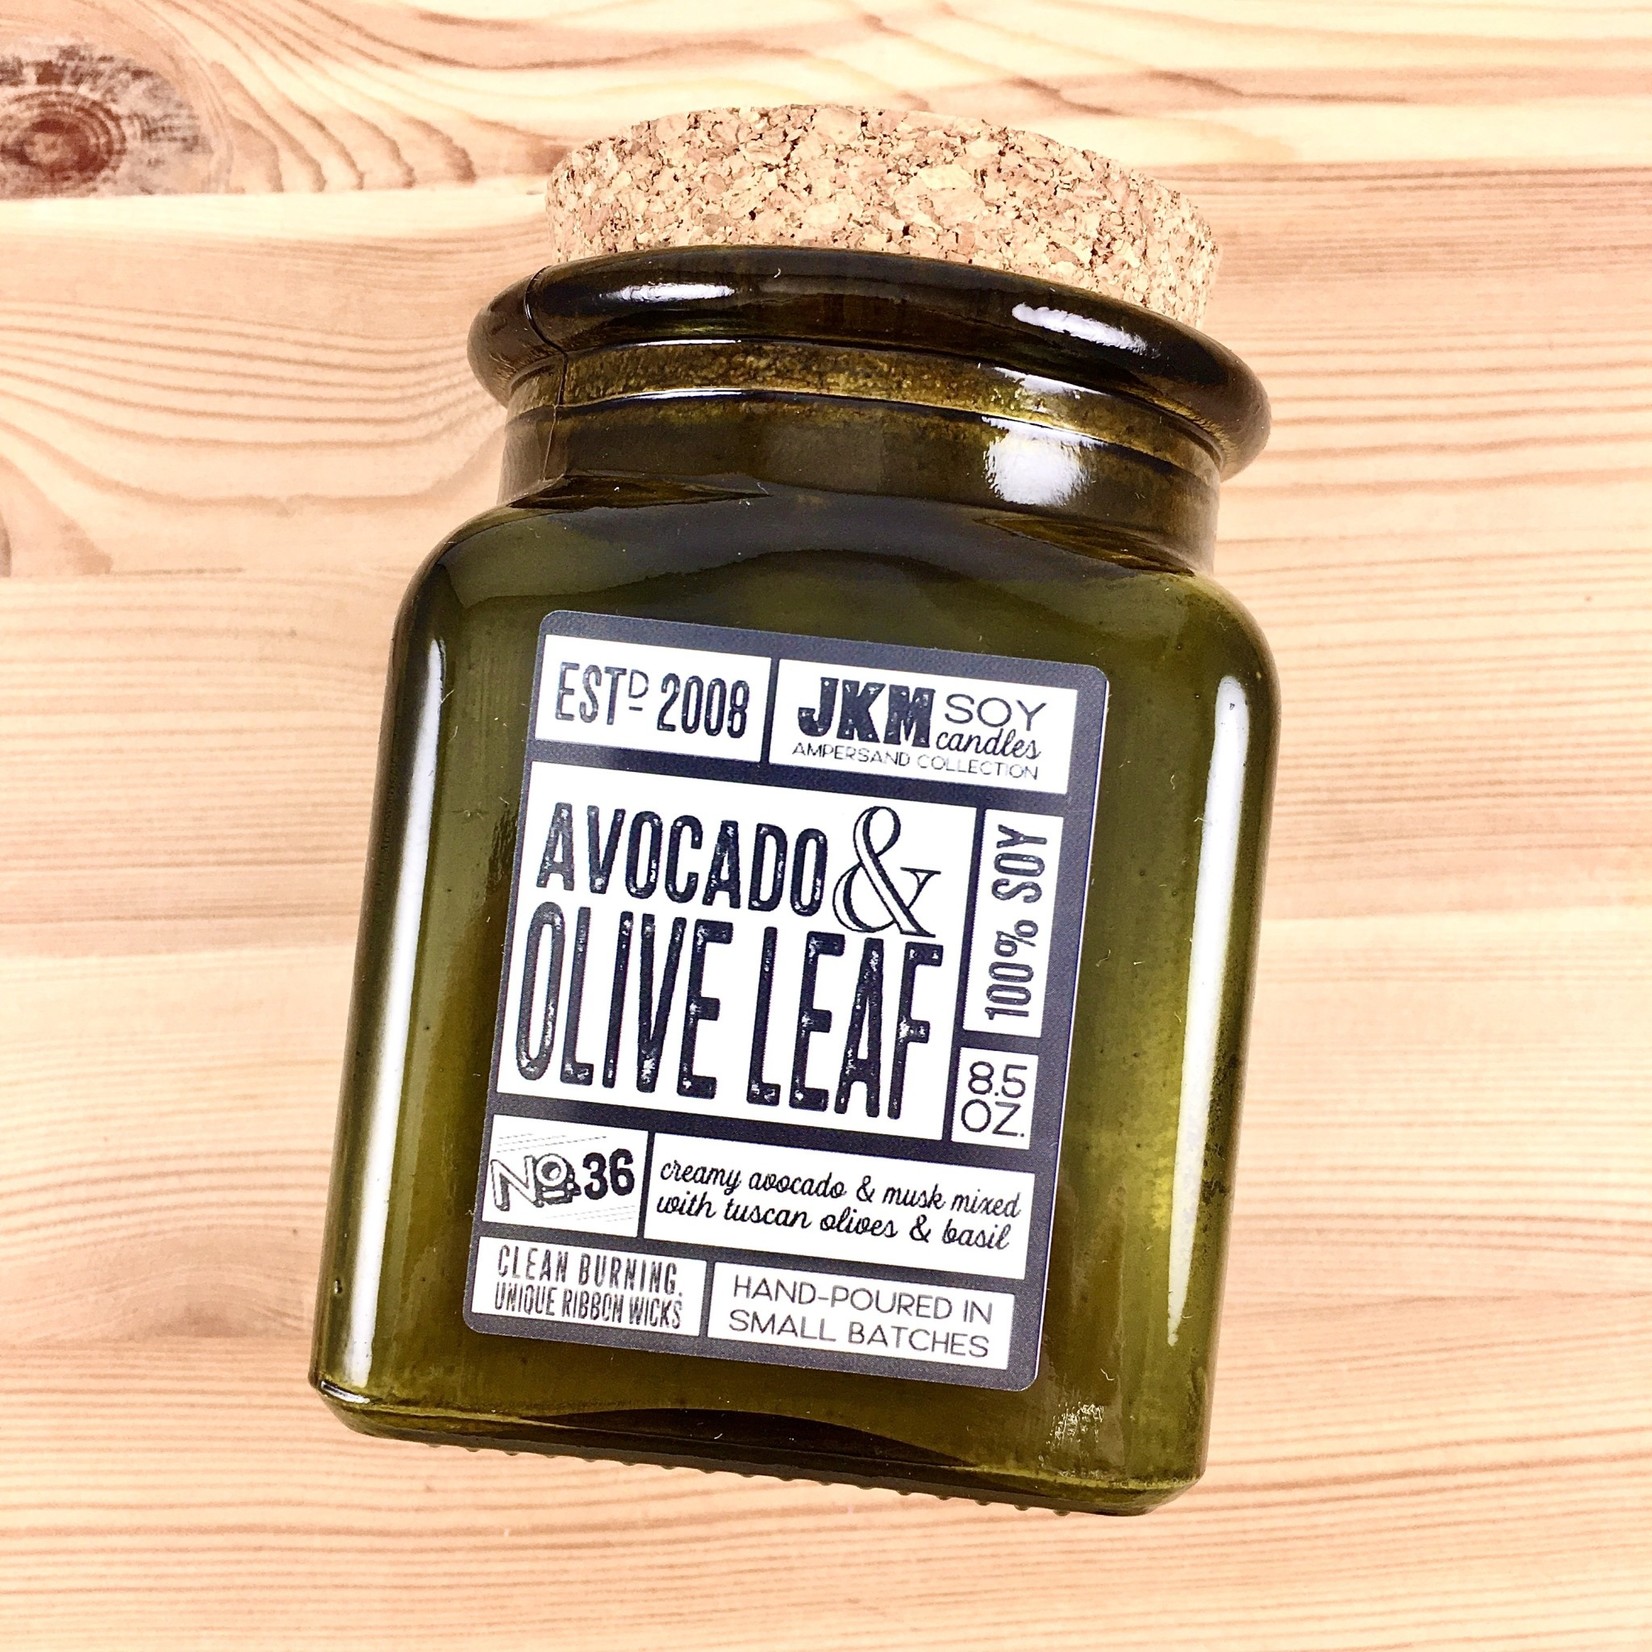 JKM Soy Candles AC: Avocado & Olive Leaf Soy Candle